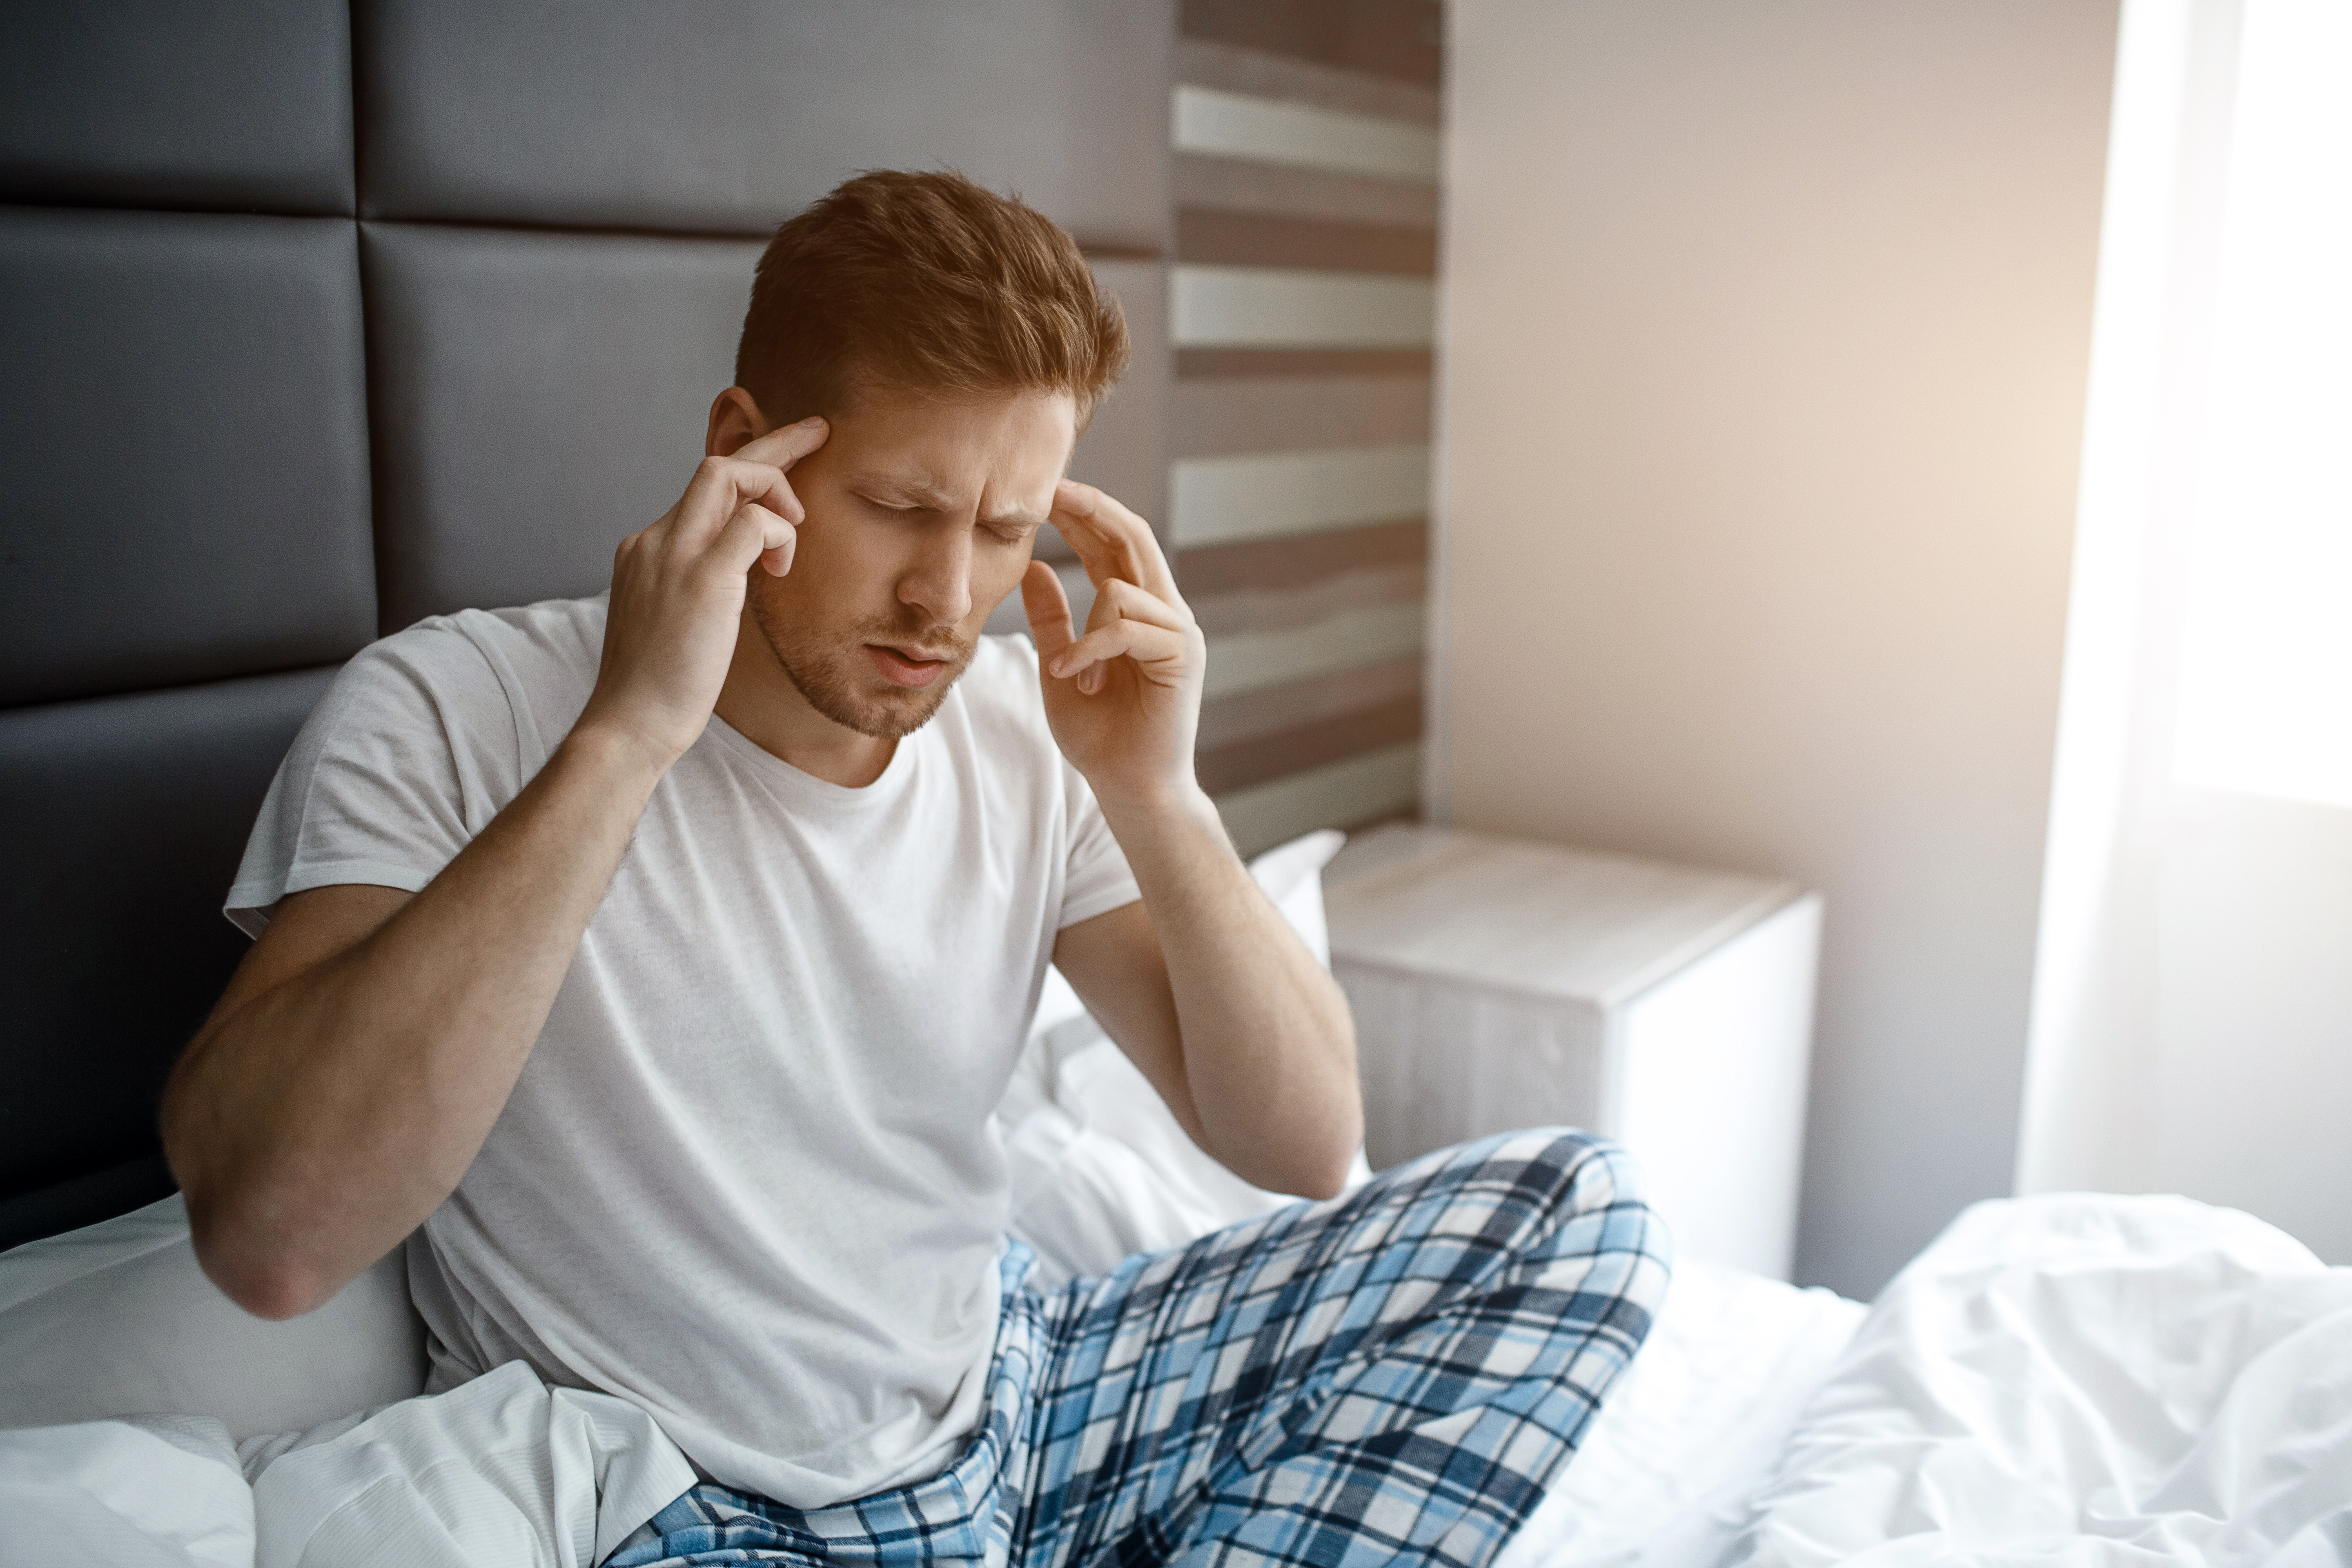 Can TMJ Disorder Cause an Ear to Clog During Sleep?